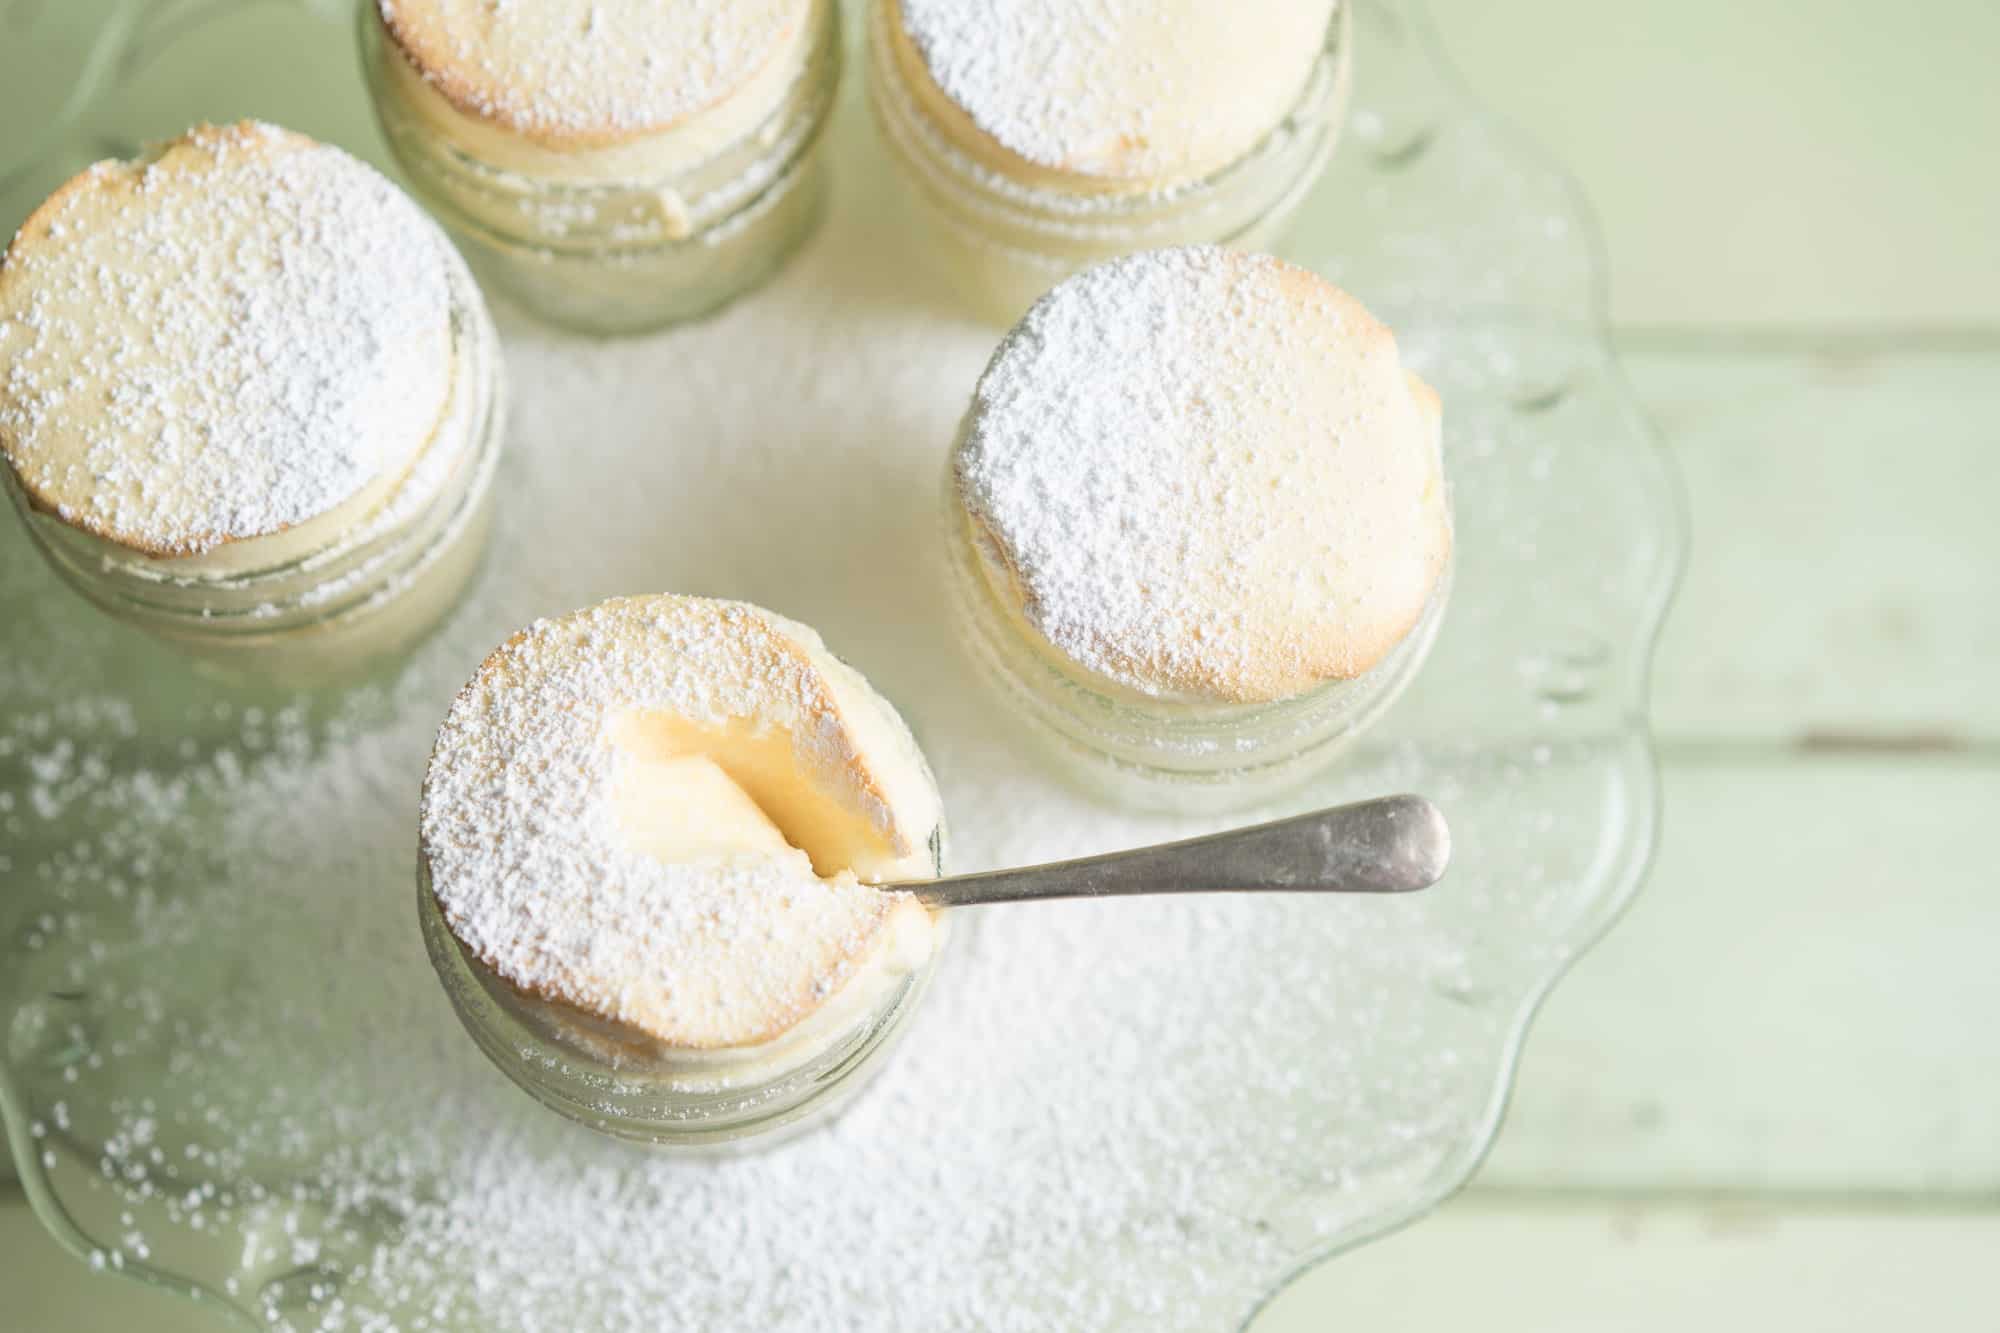 HiP Paris Blog rounds up where to eat the best souffle in Paris, like these lightly-dusted pots of souffle.